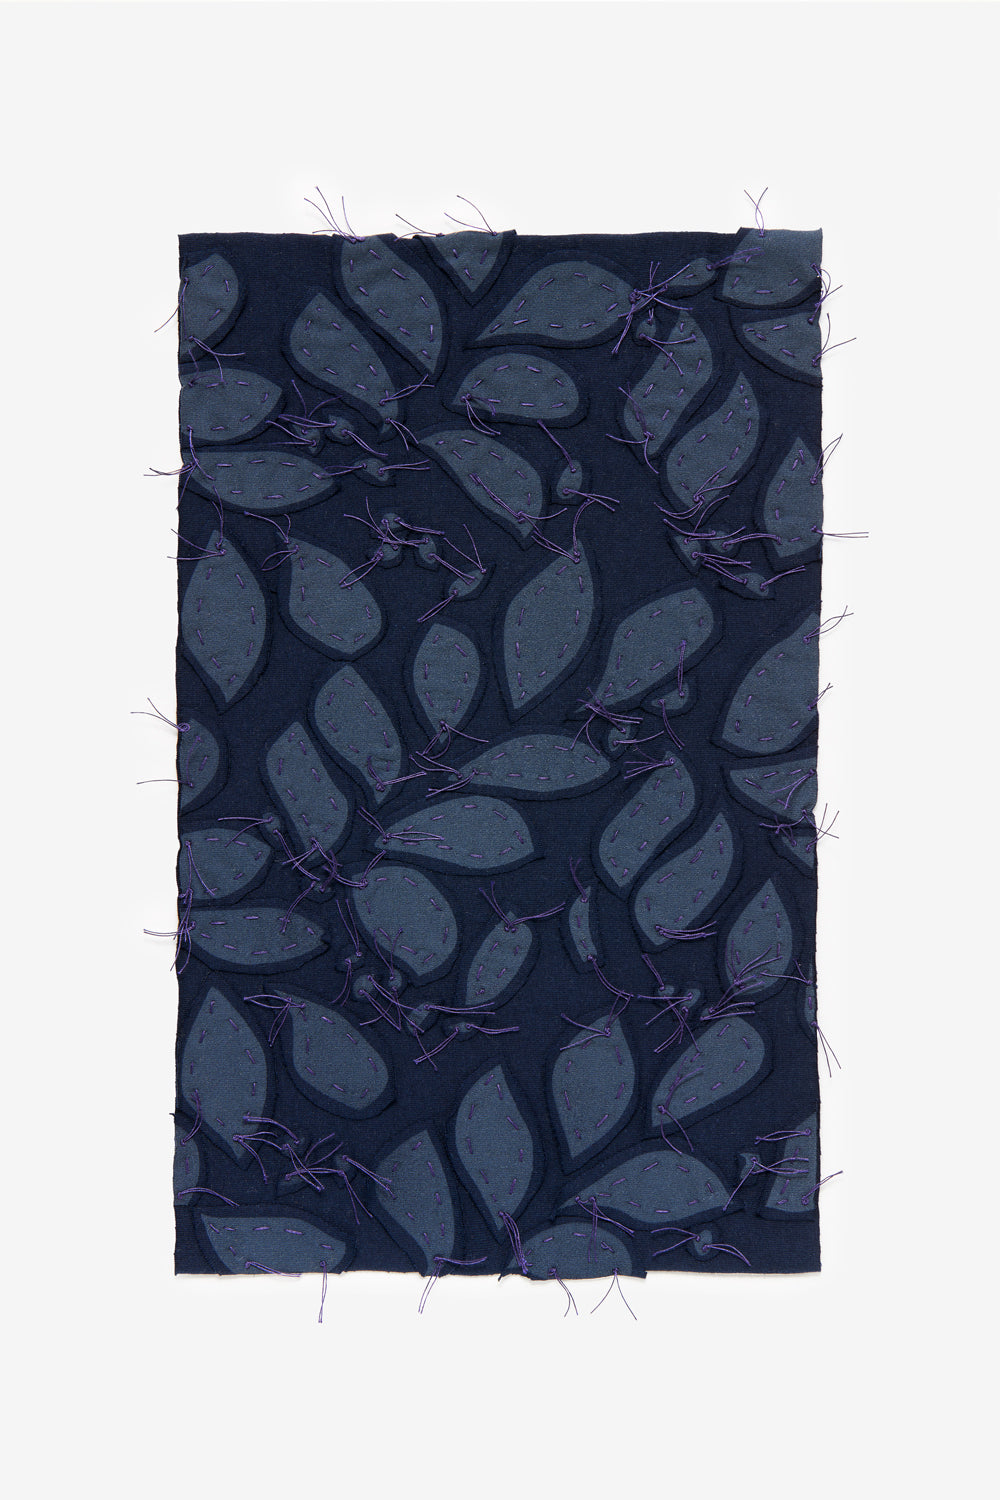 The School of Making fabric swatch in navy with Bloomers stencil design.